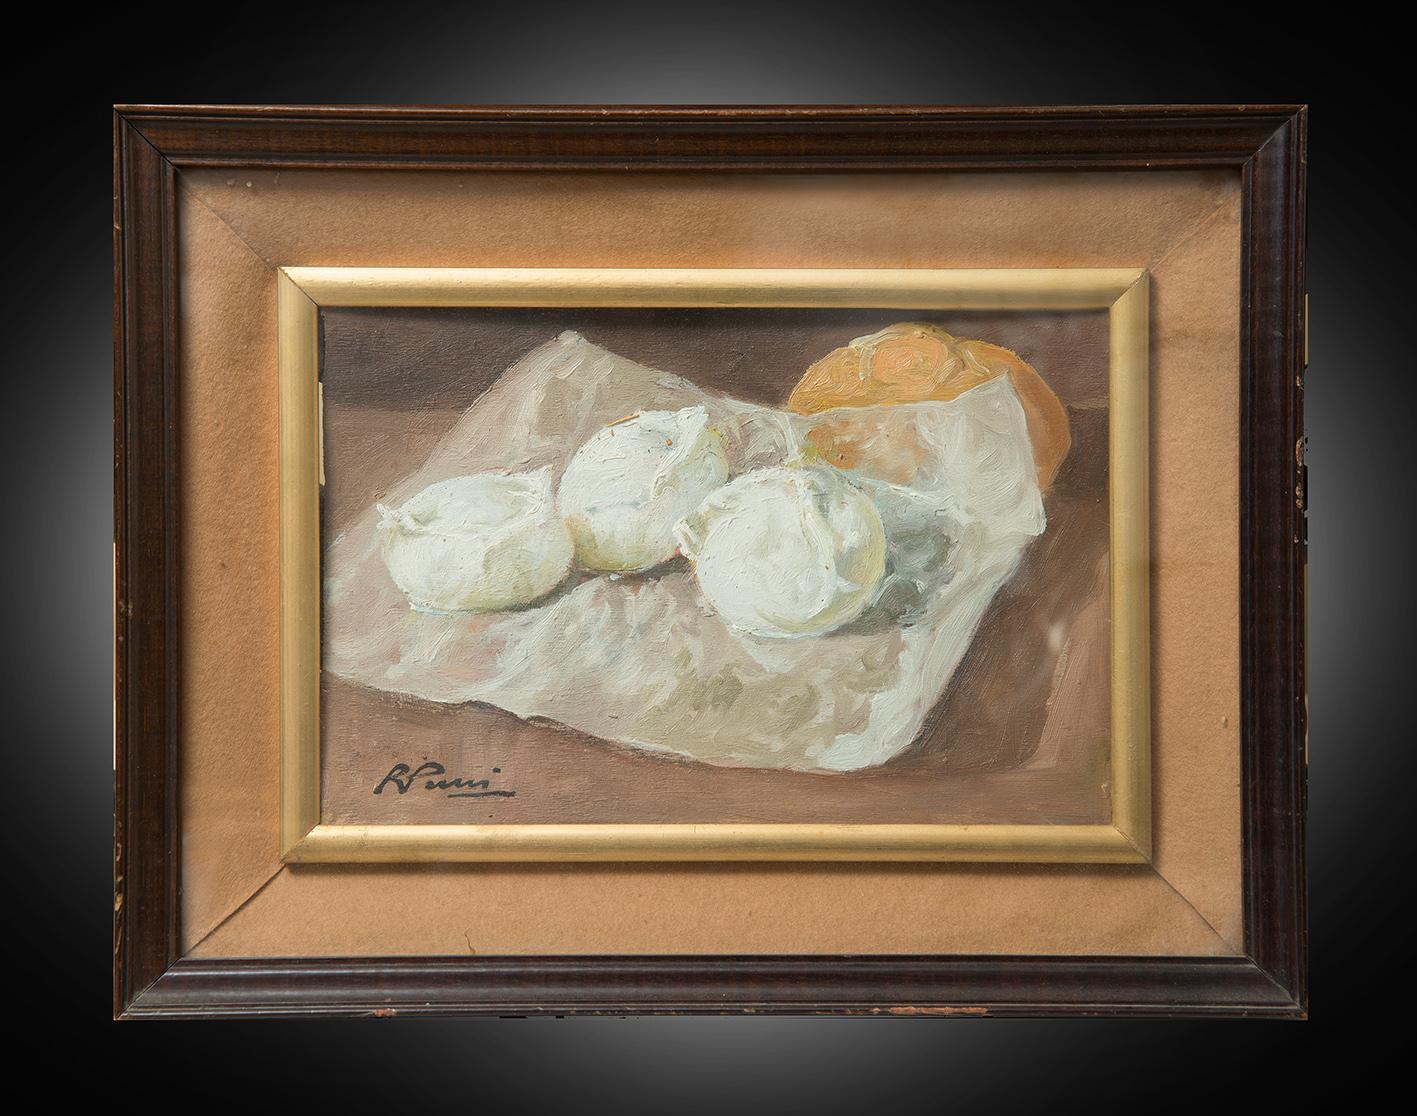 Unknown Still-Life Painting - Antique oil on canvas painting depicting Still Life signed "Raffaele Pucci."